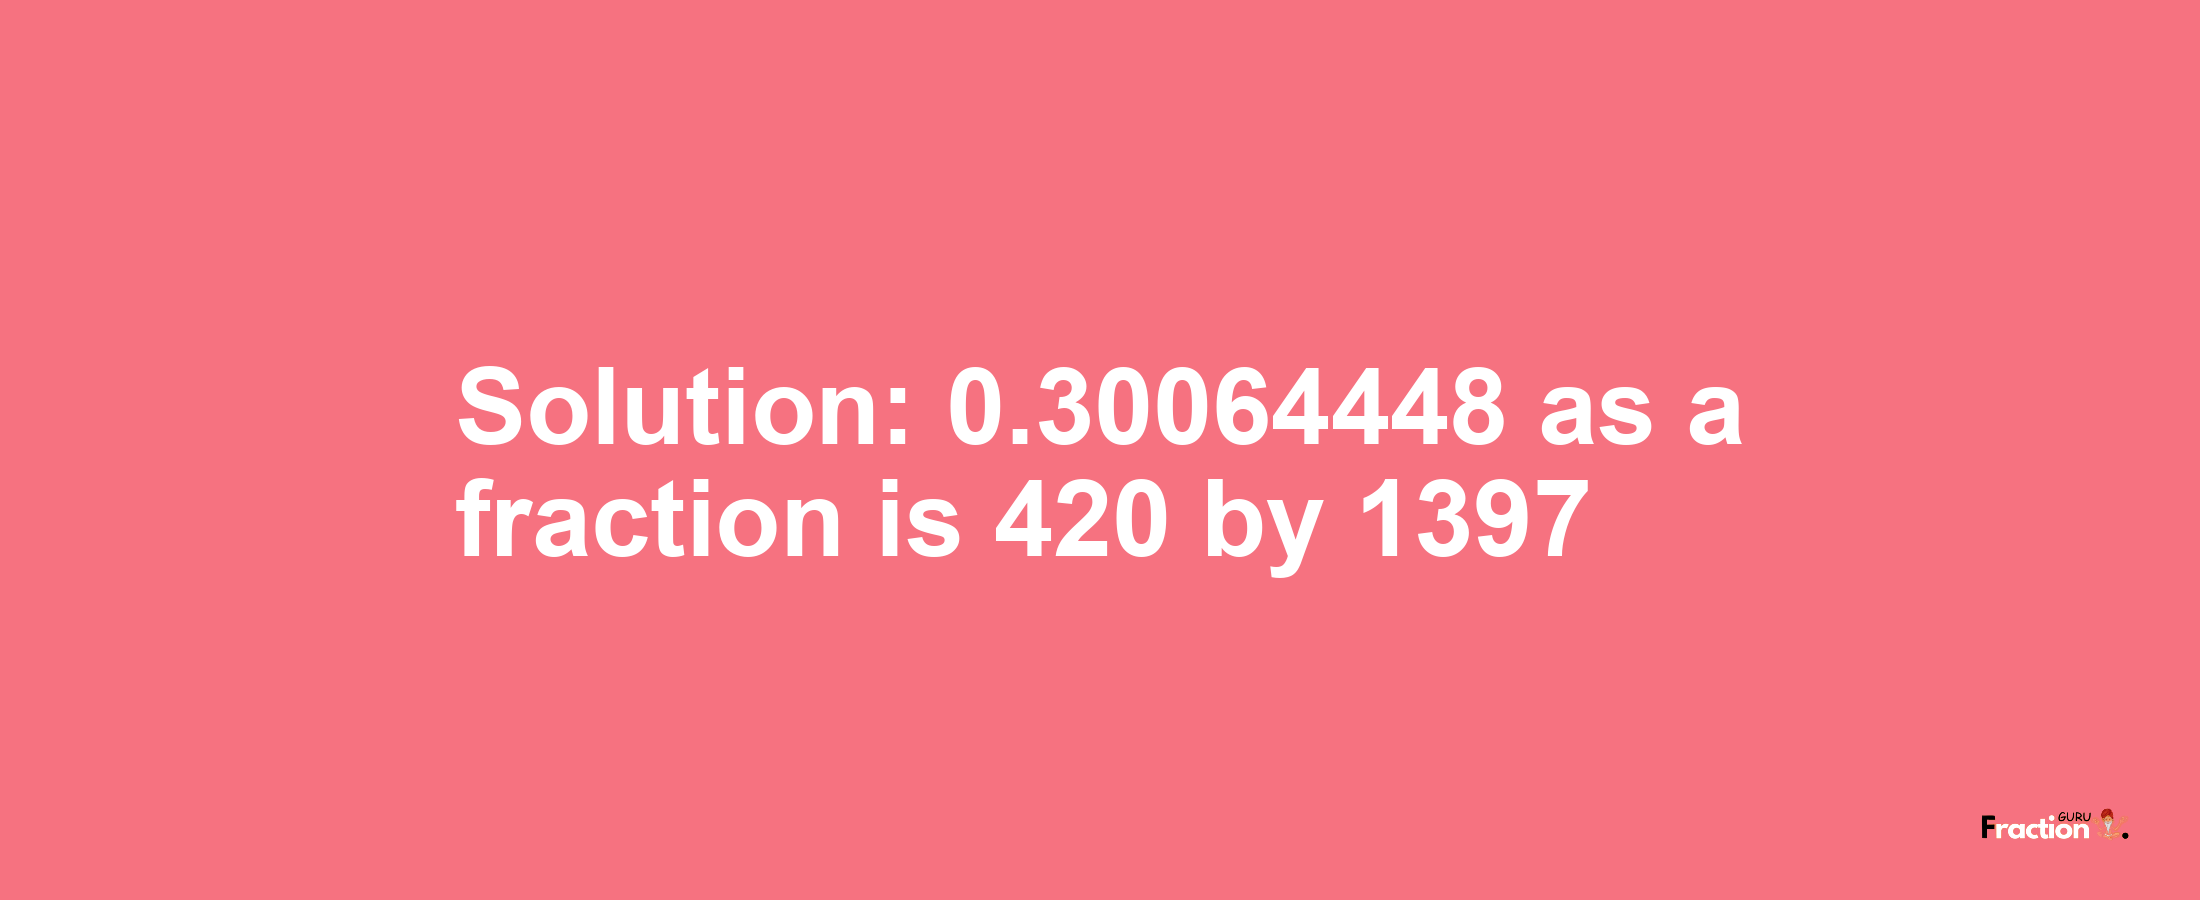 Solution:0.30064448 as a fraction is 420/1397